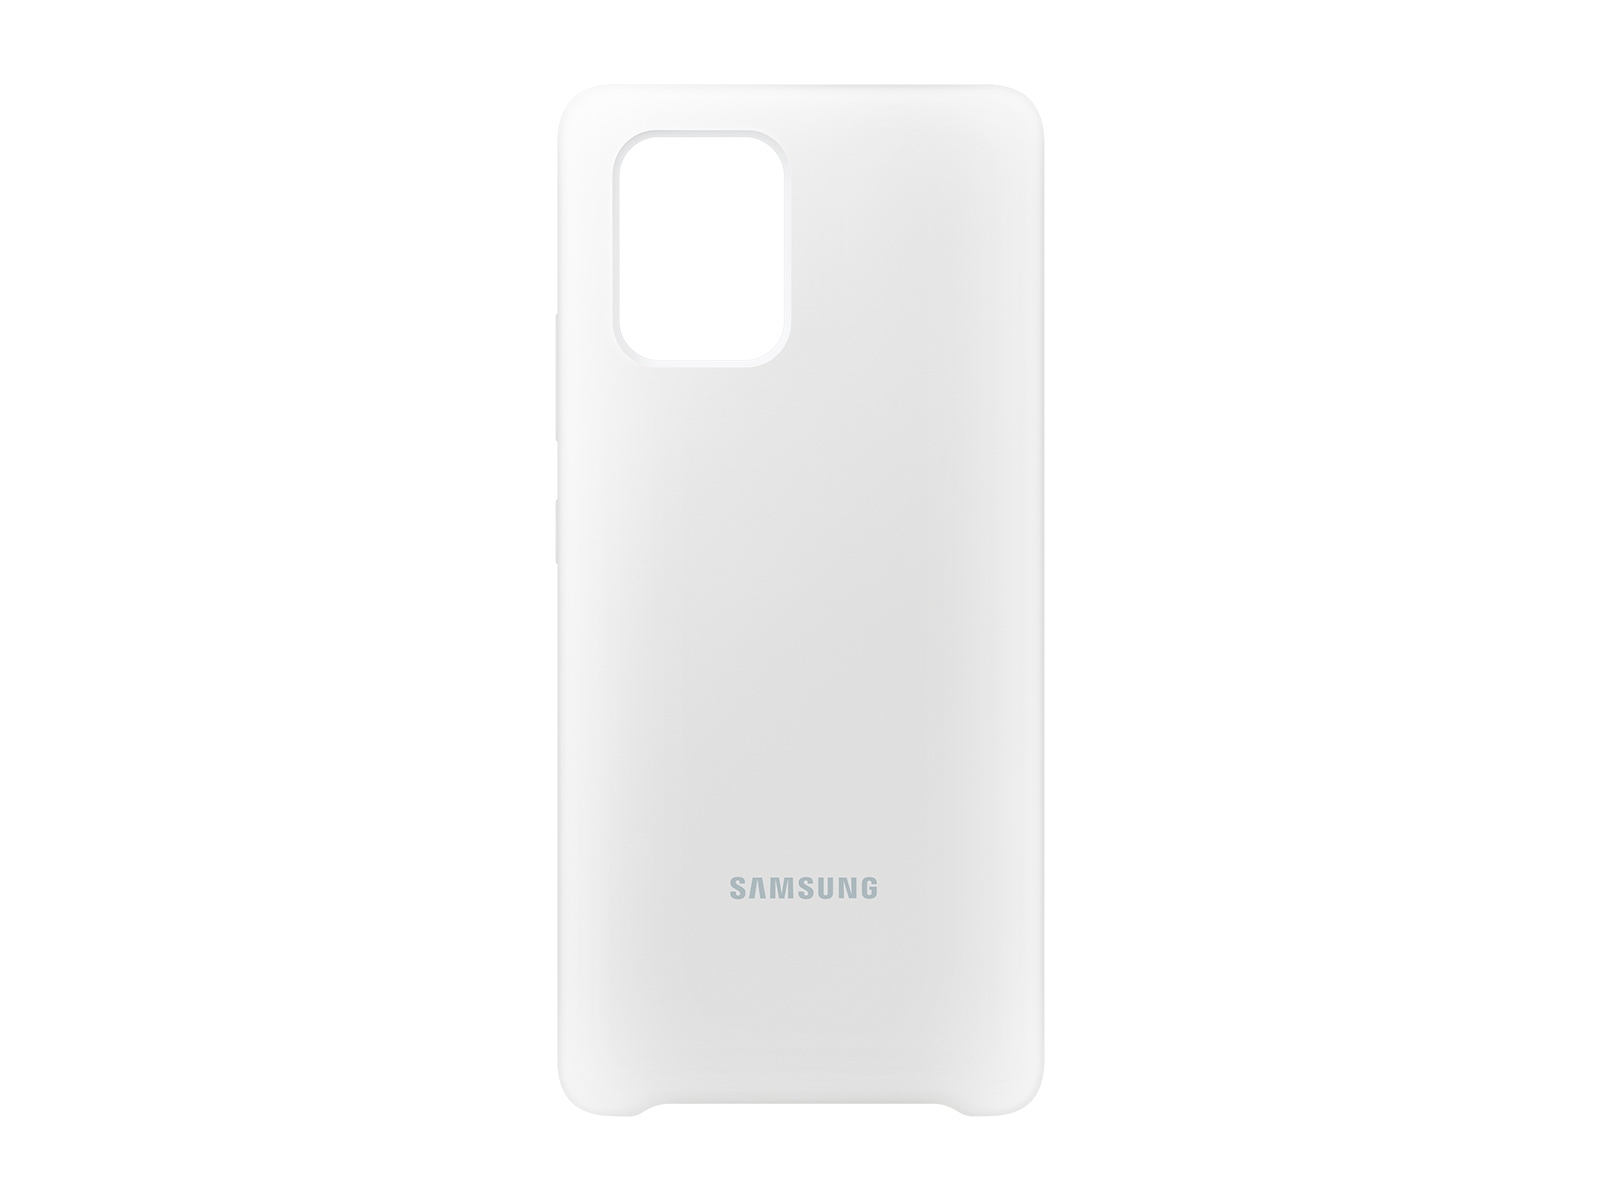 Thumbnail image of Galaxy S10 Lite Silicone Cover, White